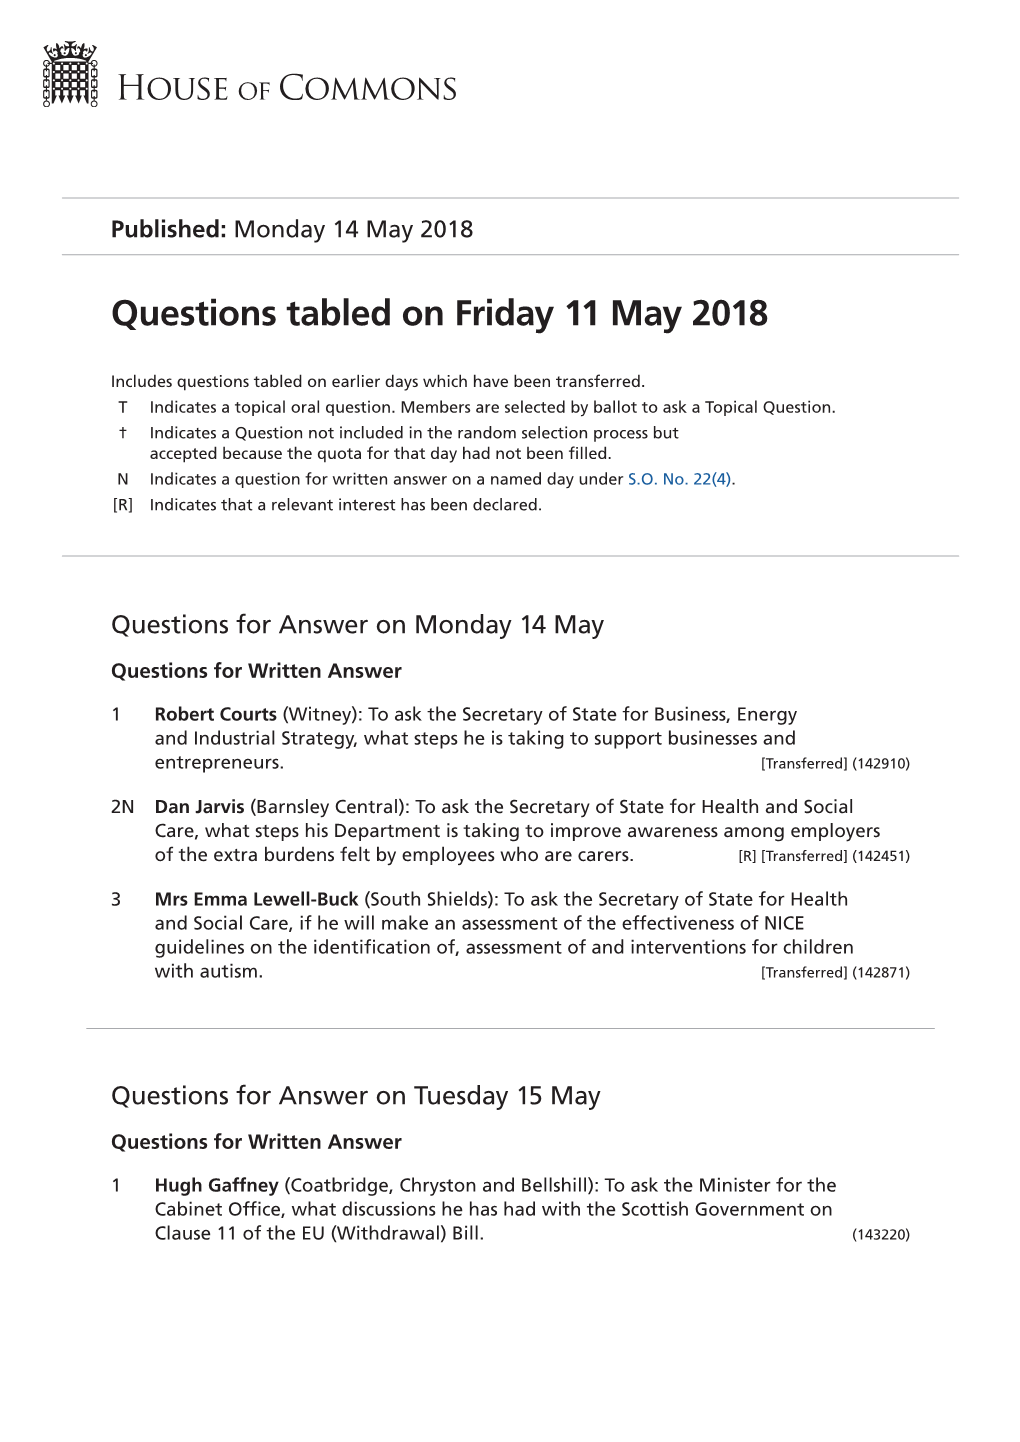 Questions Tabled on Fri 11 May 2018